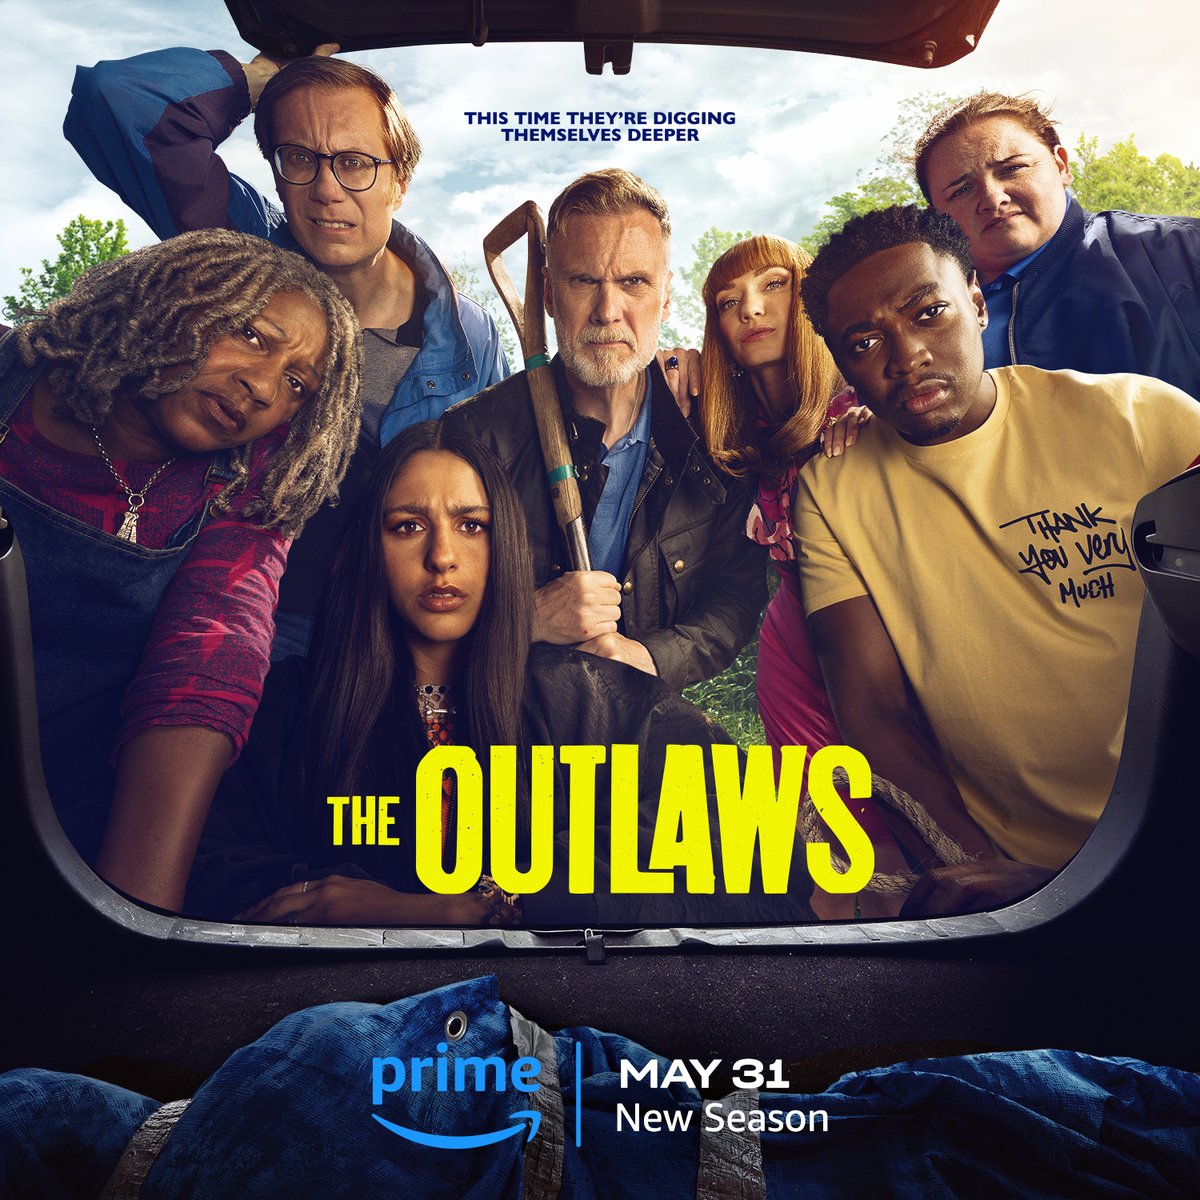 The Outlaws. Digging deeper. May 30 on @BBCiPlayer and May 31 on @PrimeVideo.